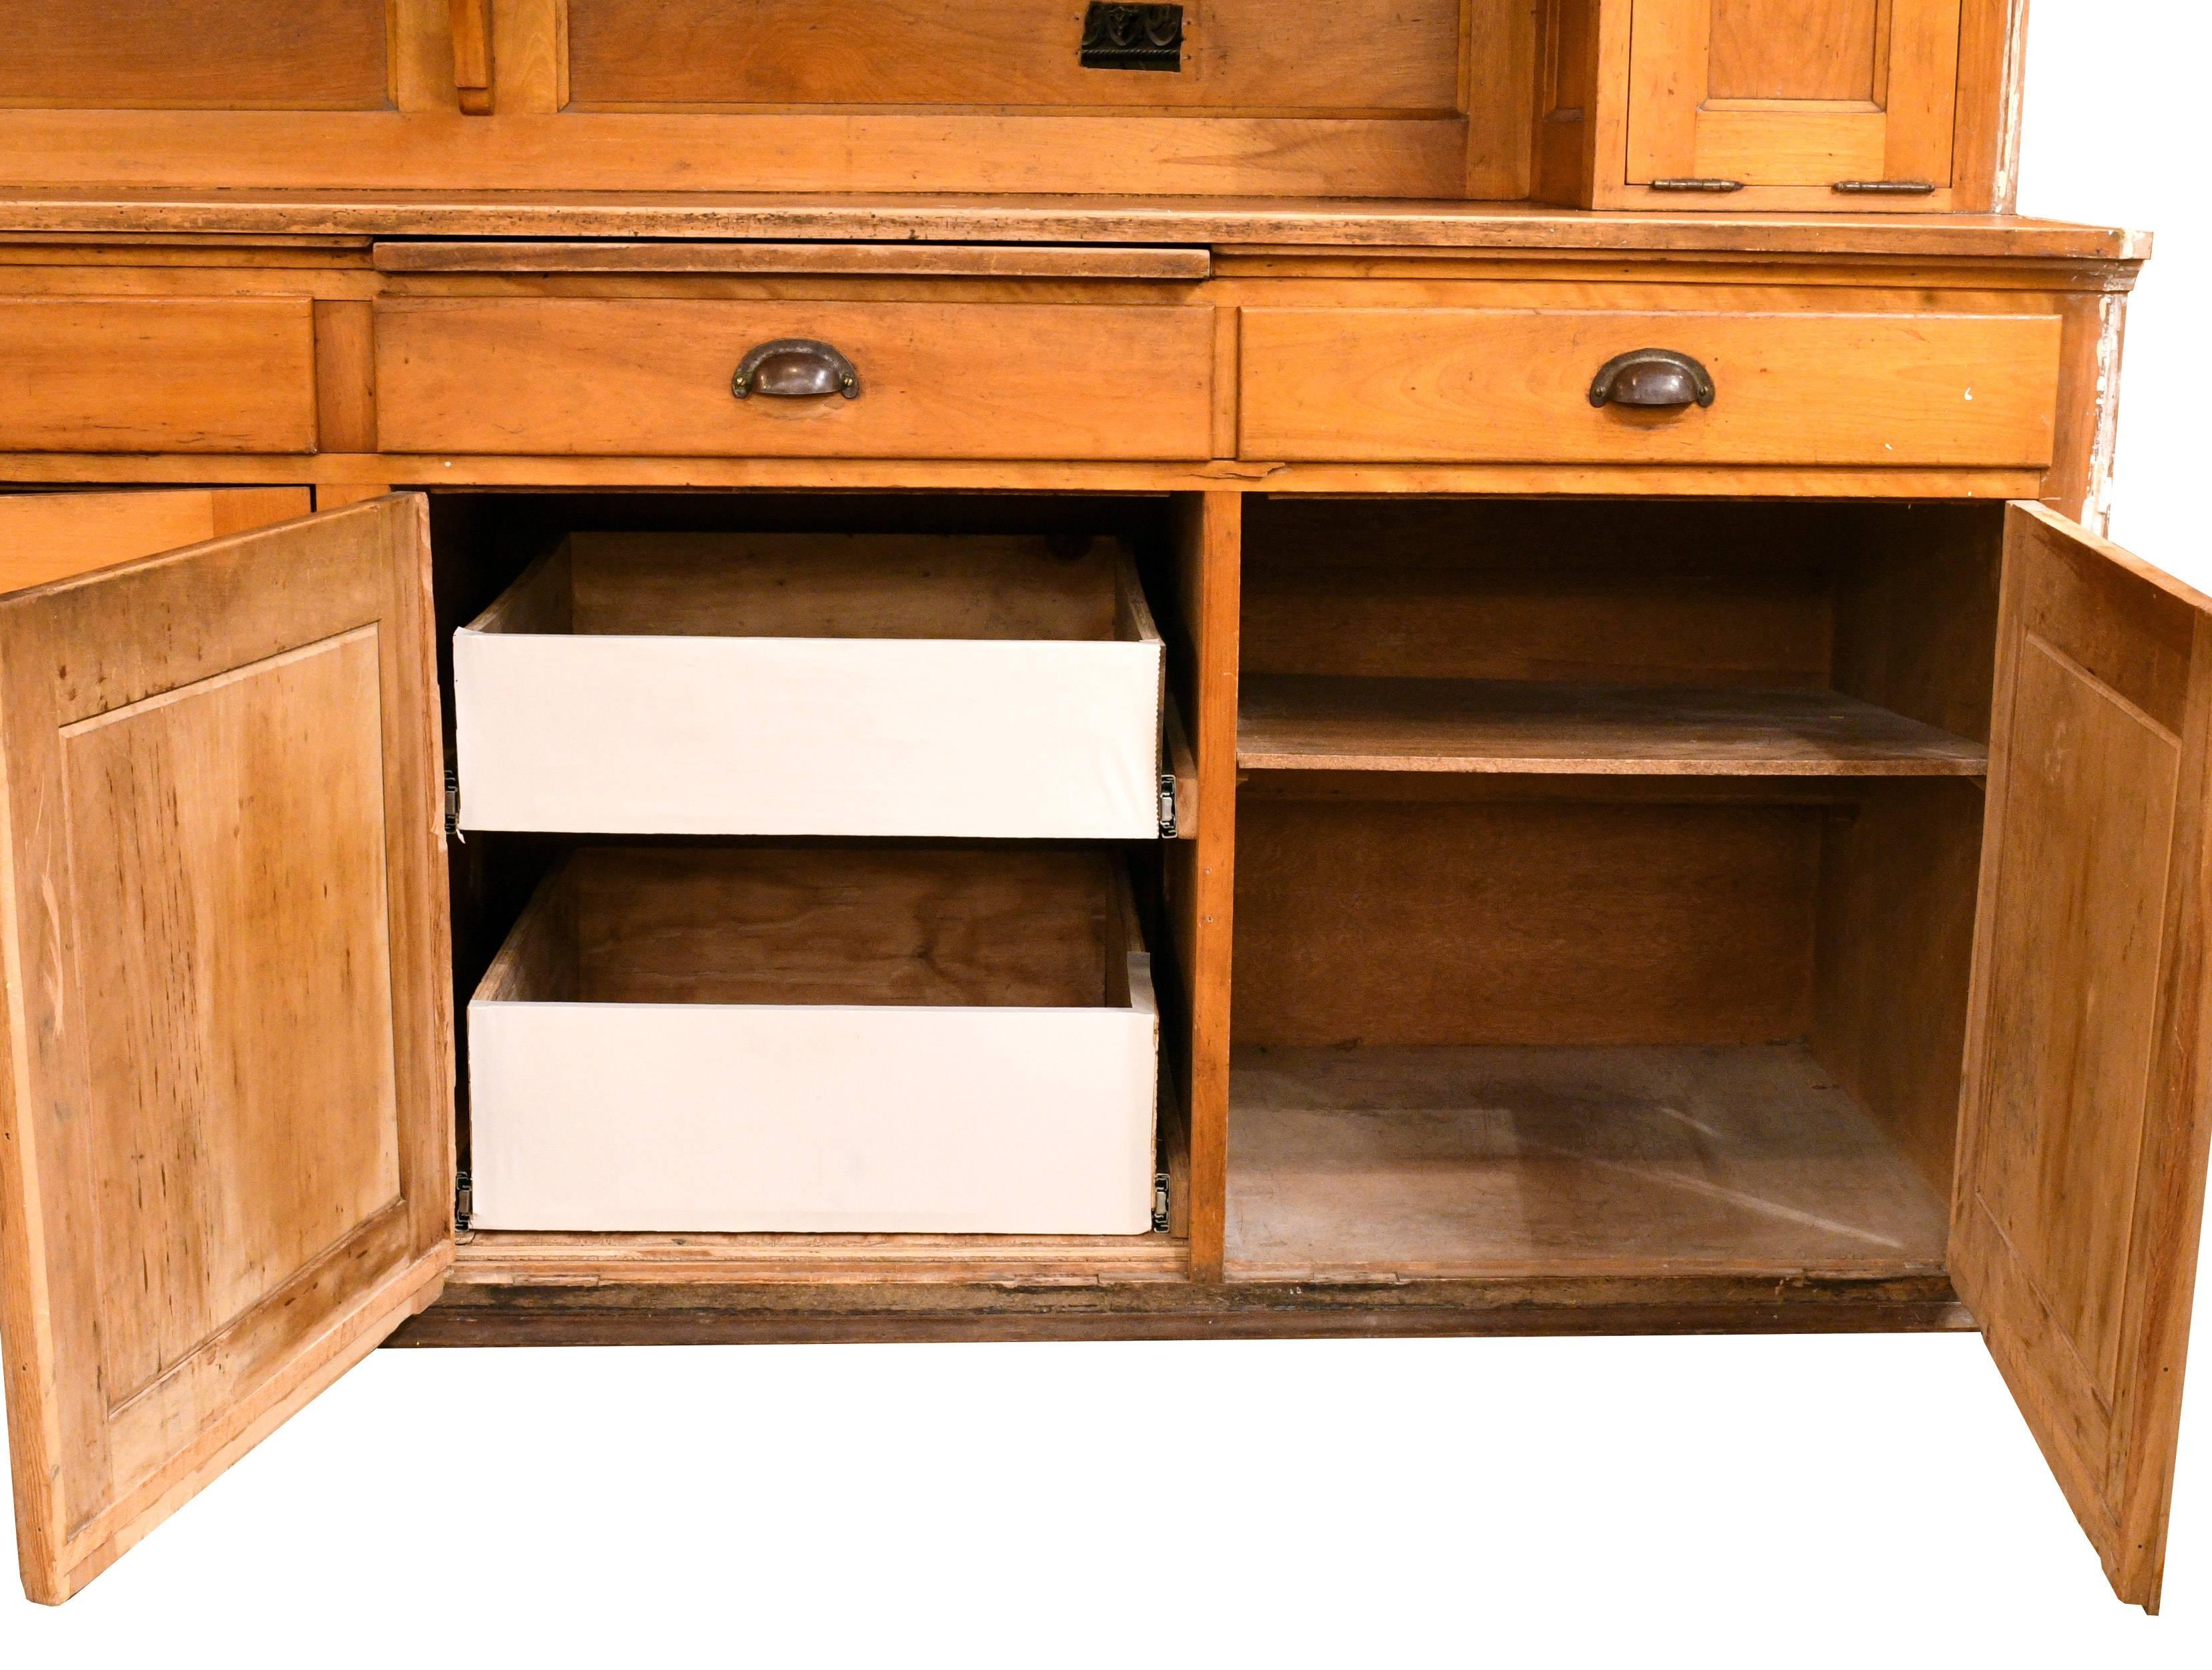 This built-in maple kitchen cabinet was removed from a 1906 home in Minneapolis. Clean, simple lines and ample, practical storage spaces make this unit stand out from the rest. On the very top, two small cabinets offer out-of-the-way storage for